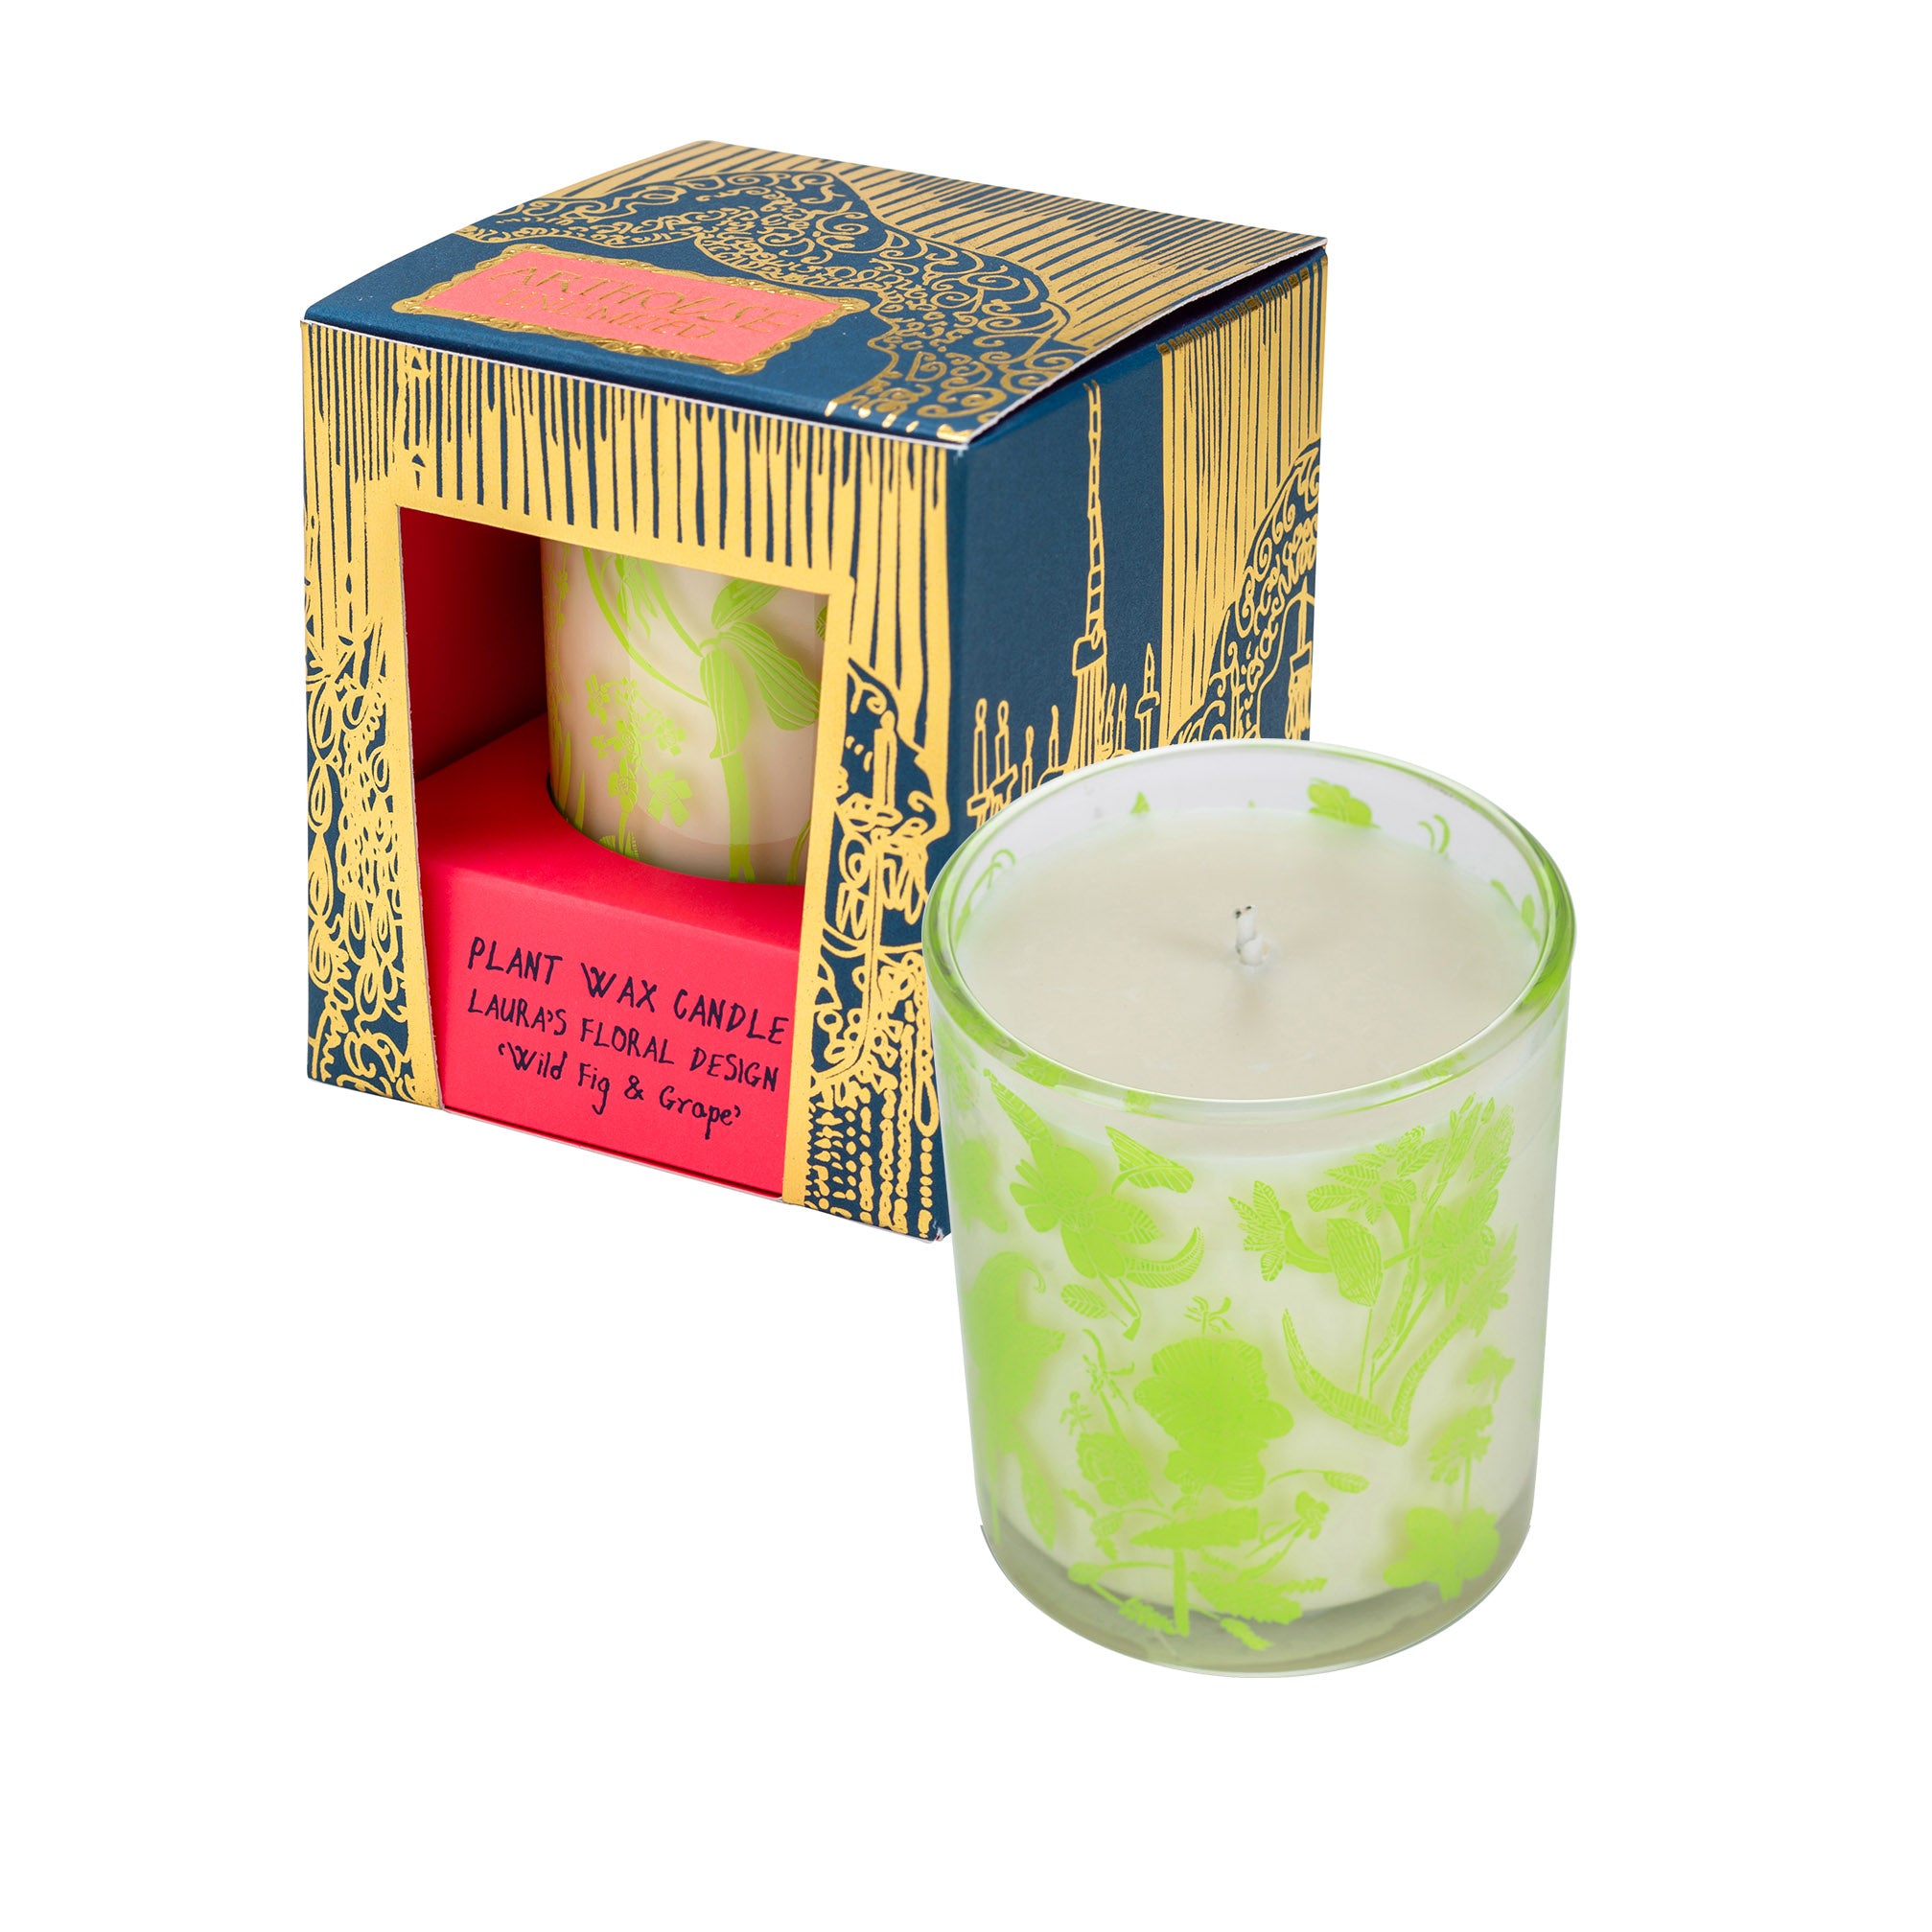 Laura's Floral, Wild Fig & Grape Plant Wax Candle. green decorated glass next to box